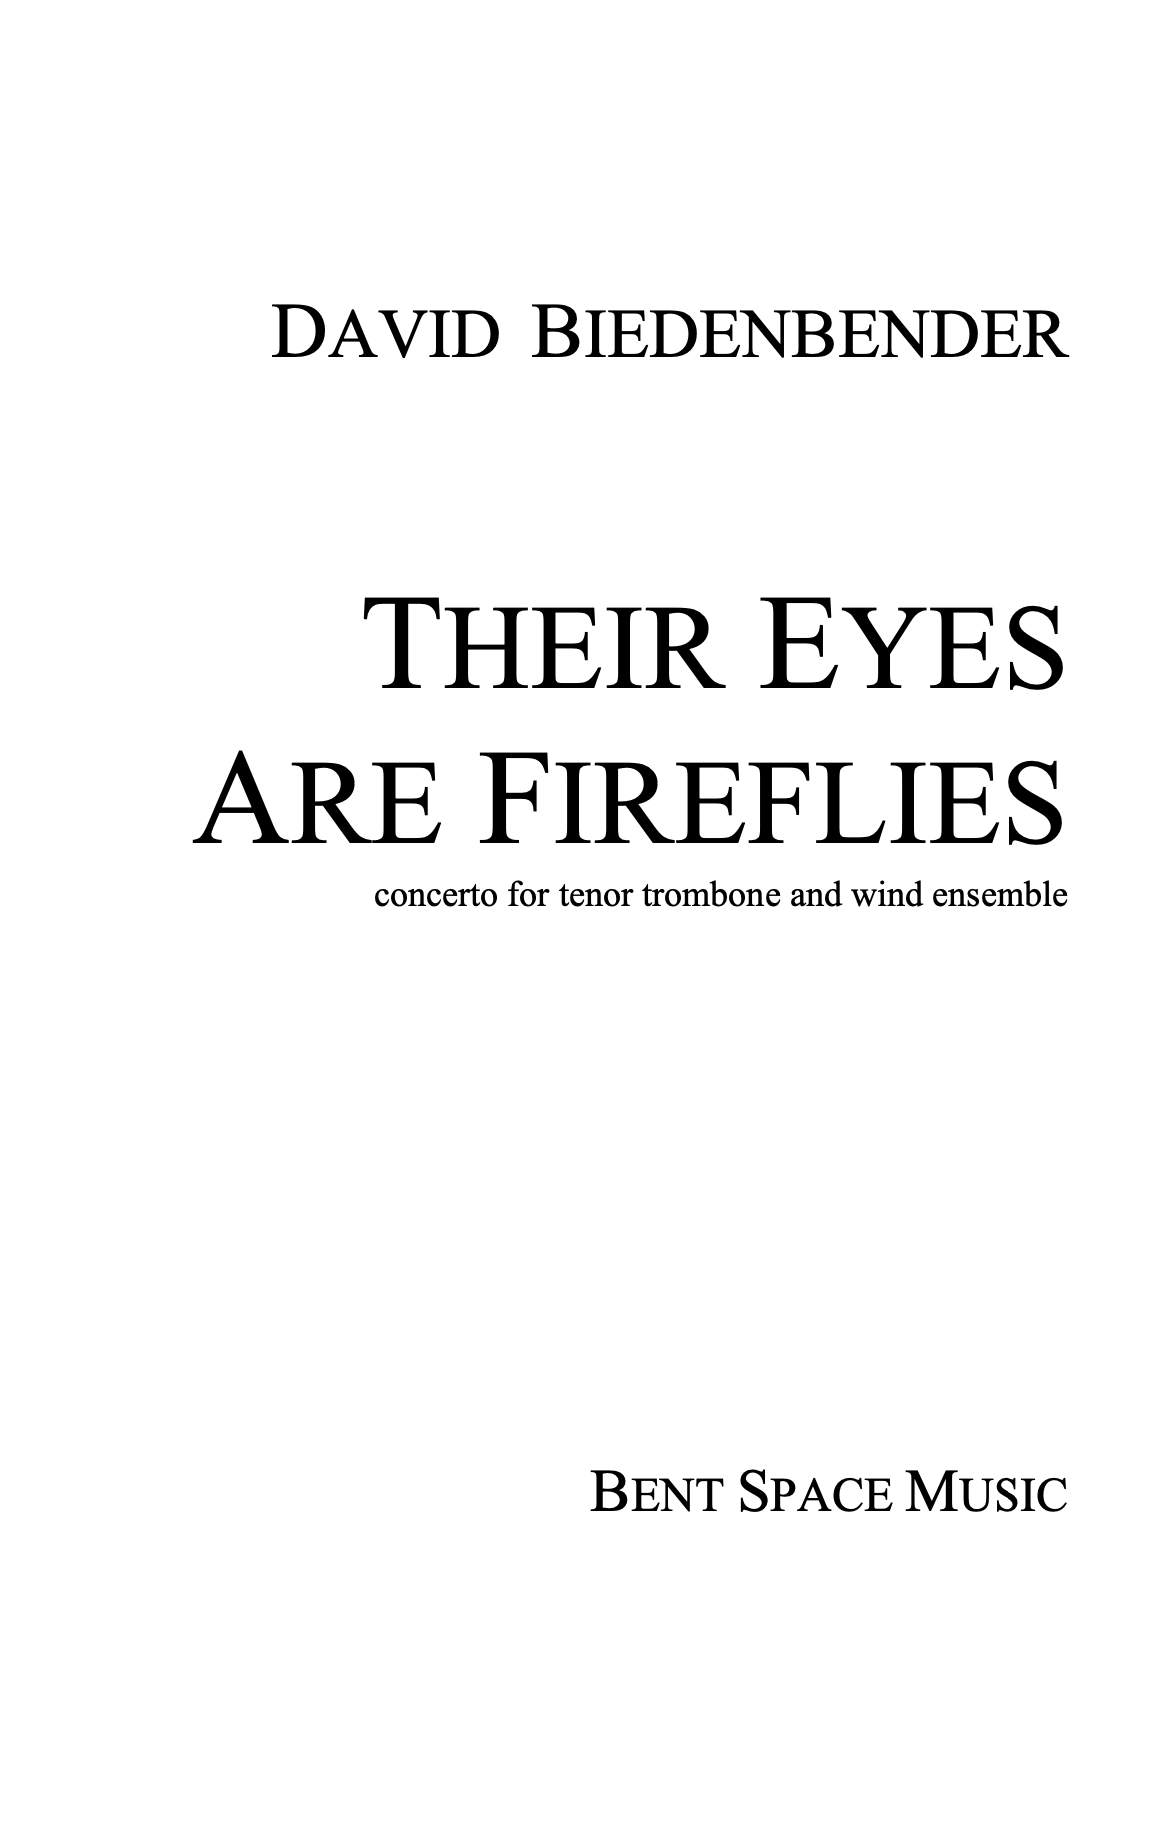 Their Eyes Are Fireflies (Score Only) by David Biedenbender